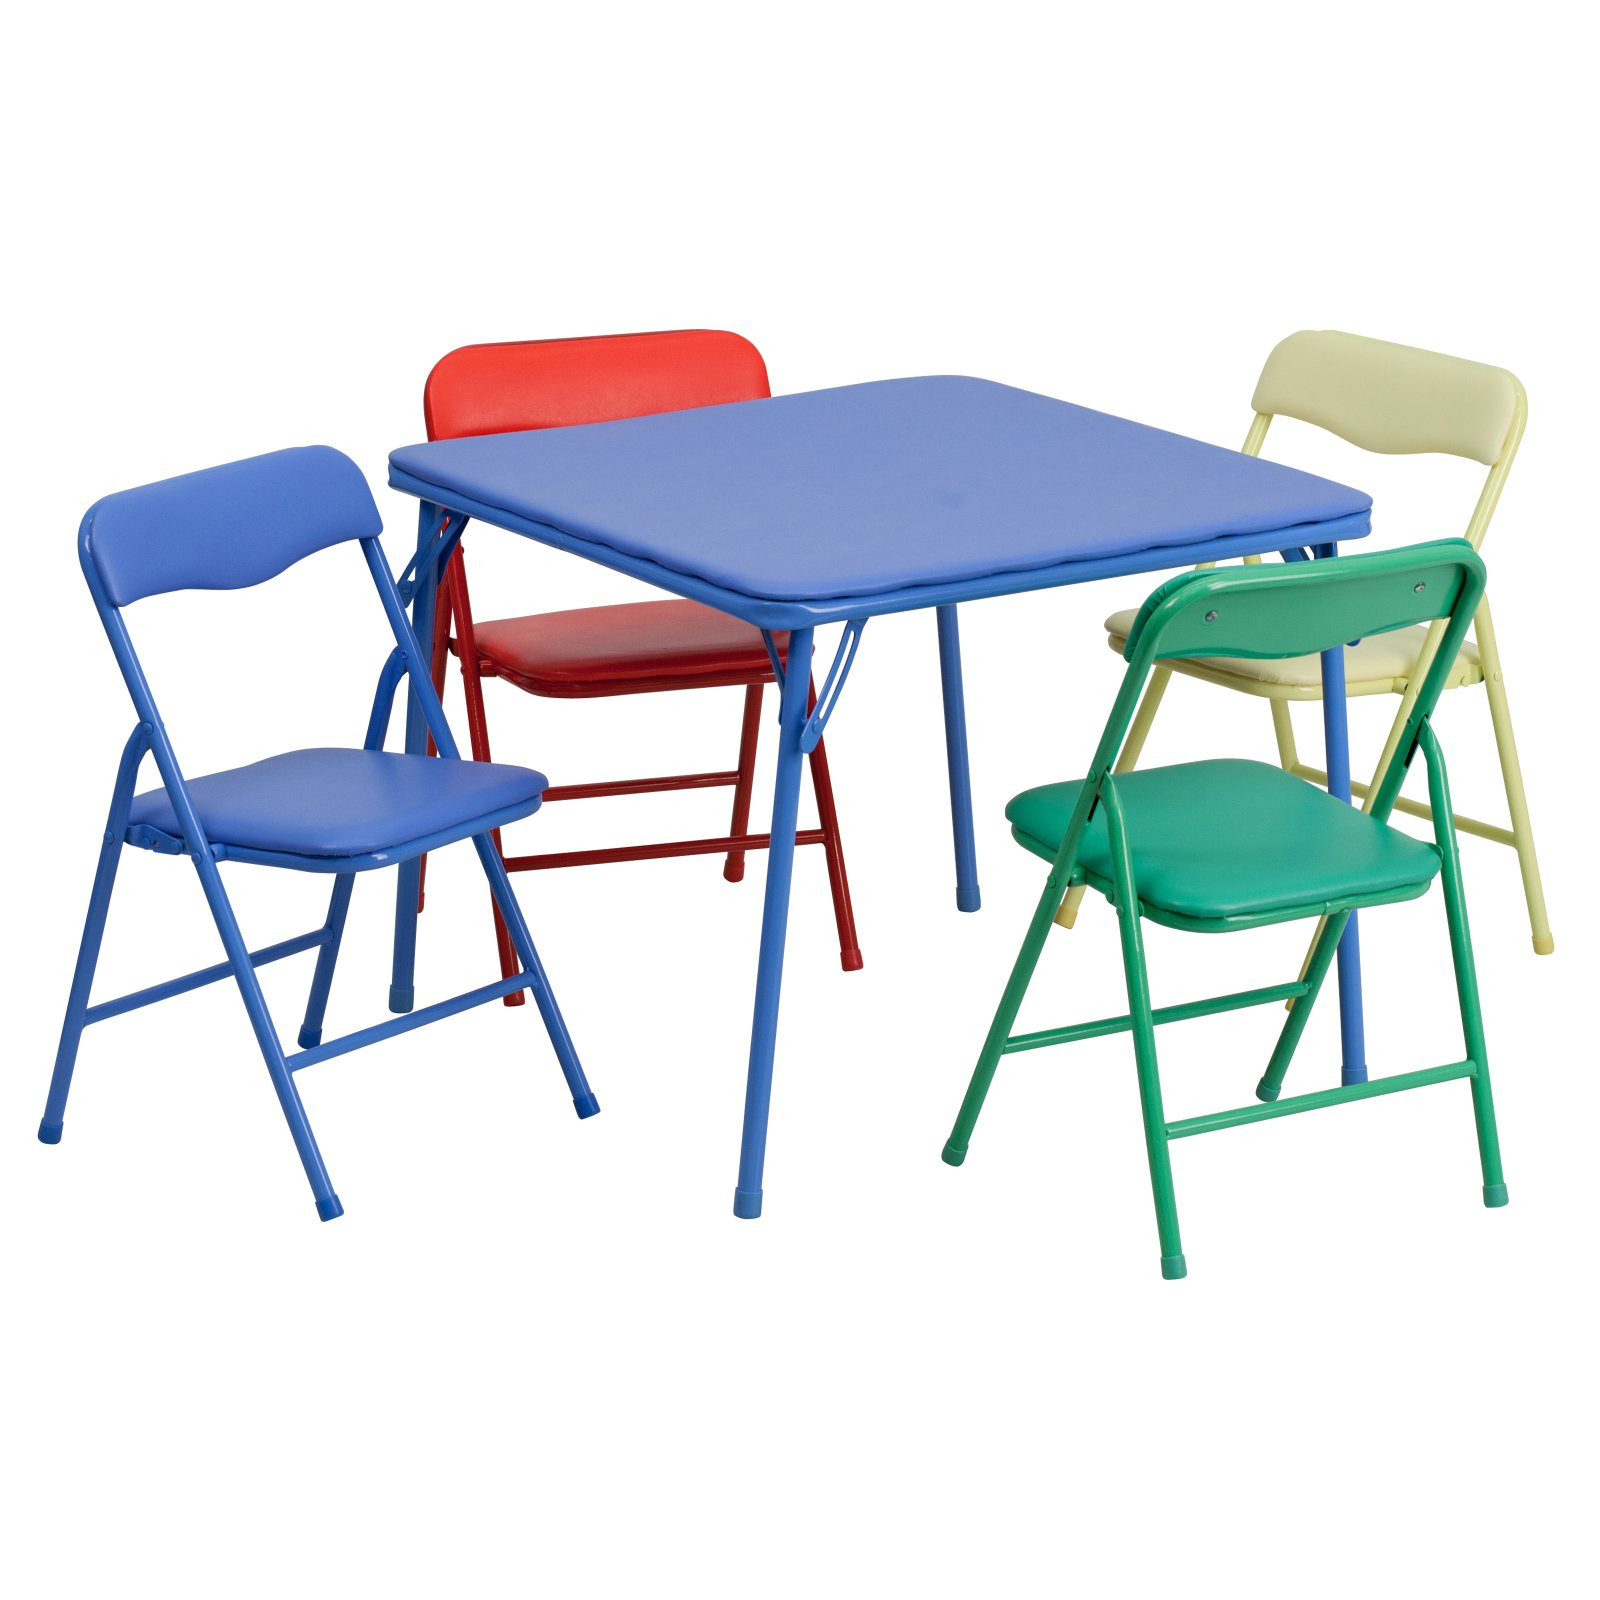 Kids Table And Chairs Walmart
 Flash Furniture Kids Colorful 5 Piece Folding Table and